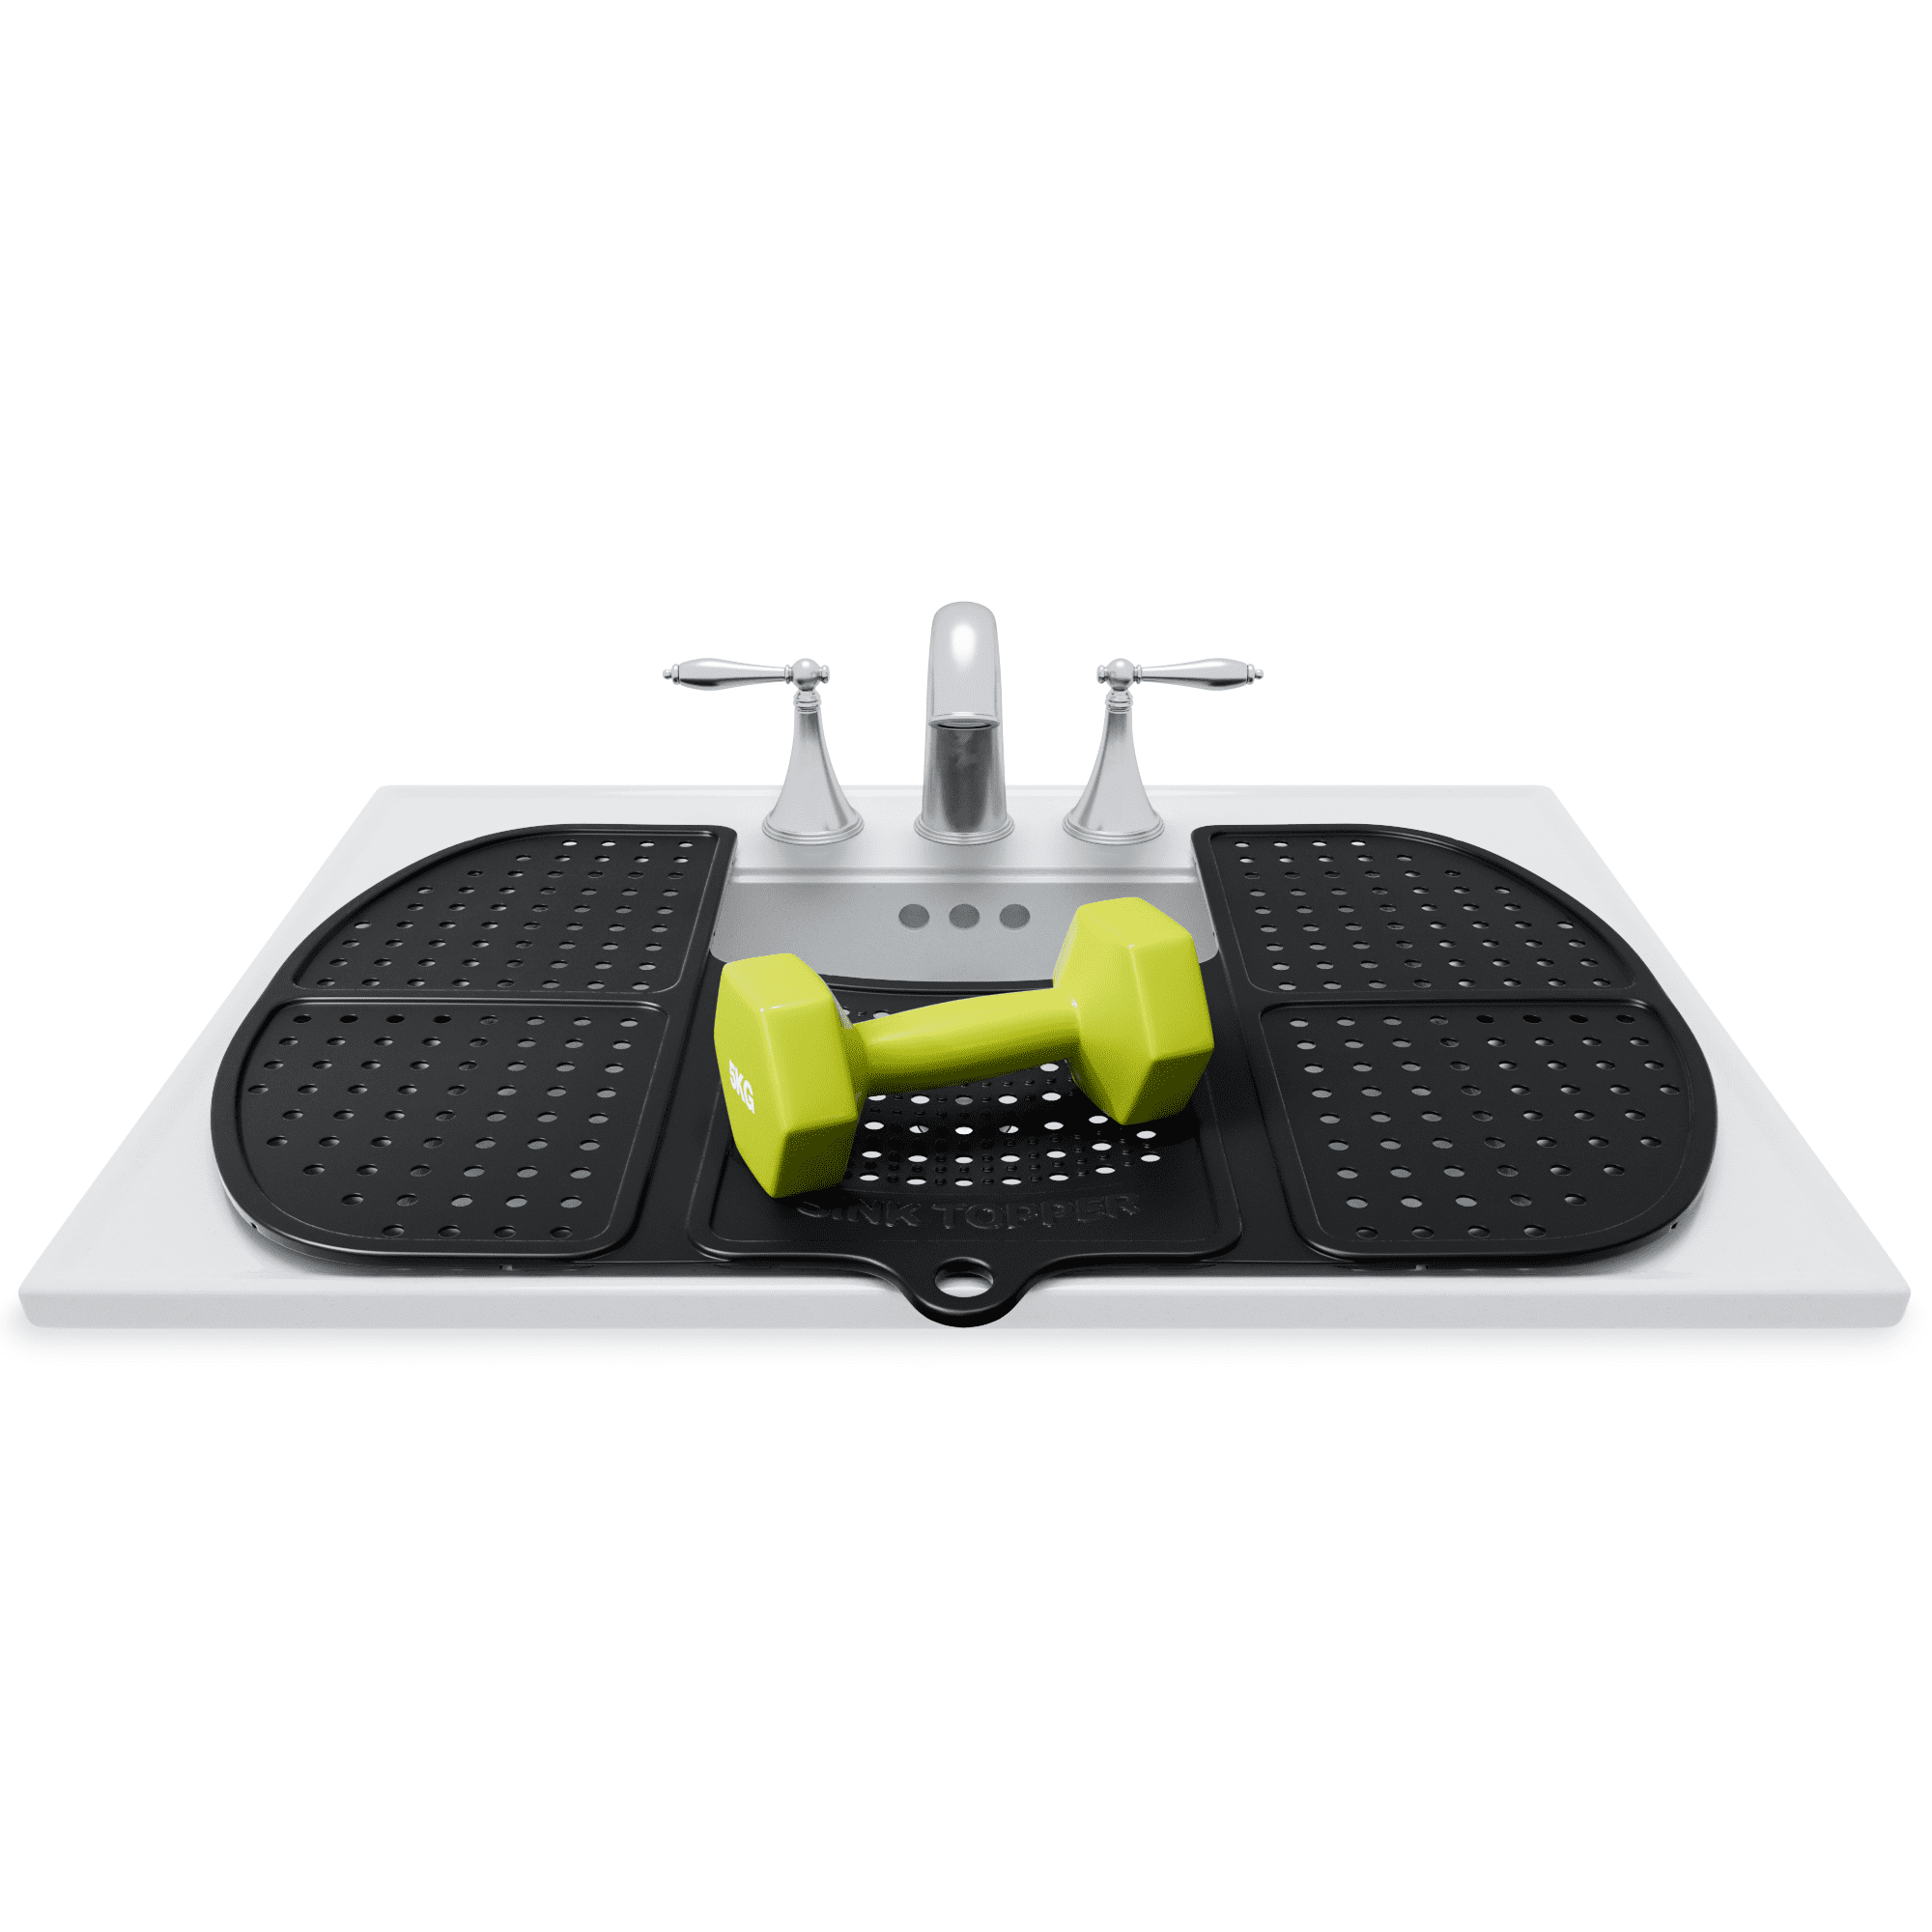 Sink Topper, Foldable Sink Cover for Counter Space. Put This Makeup mat for  Vanity on Your Bathroom Must Haves List. Optimize Your Small Bathroom counters  Space.